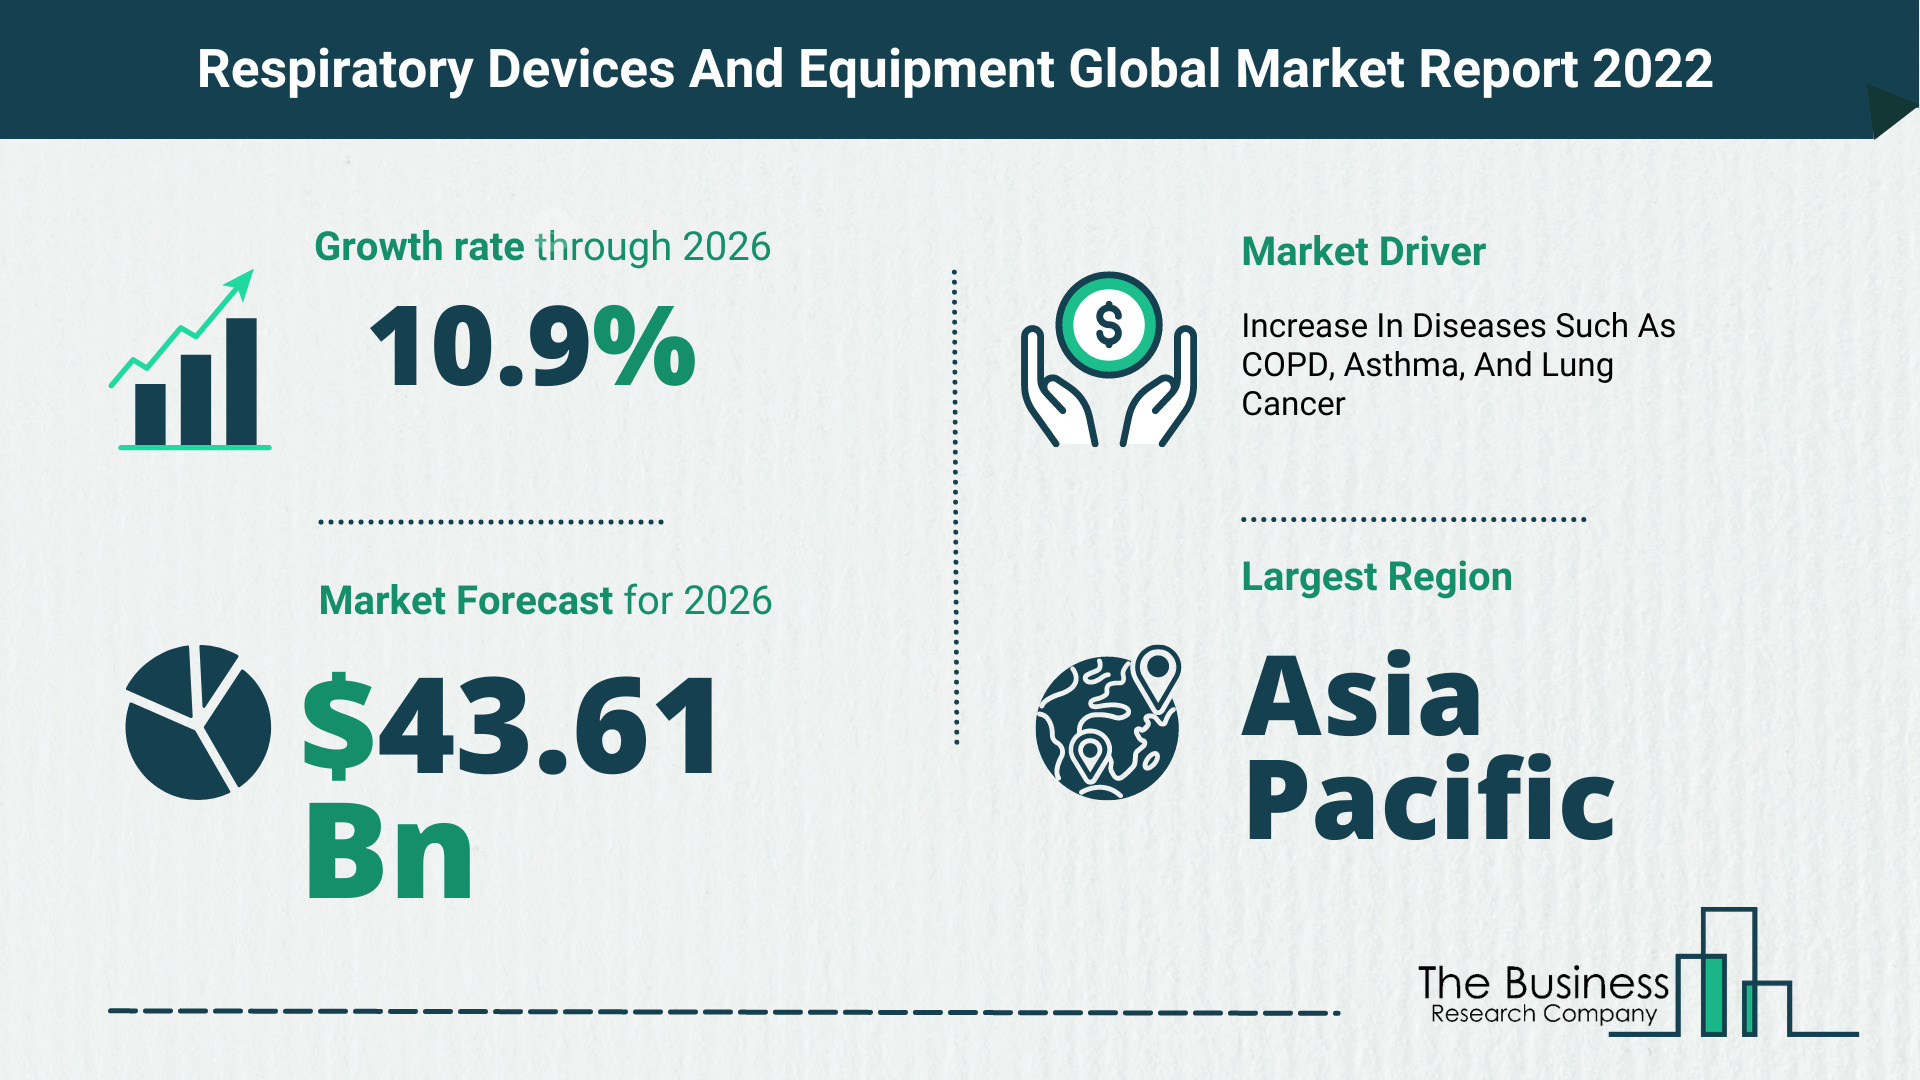 The Respiratory Devices And Equipment (Therapeutic And Diagnostic) Market Share, Market Size, And Growth Rate 2022